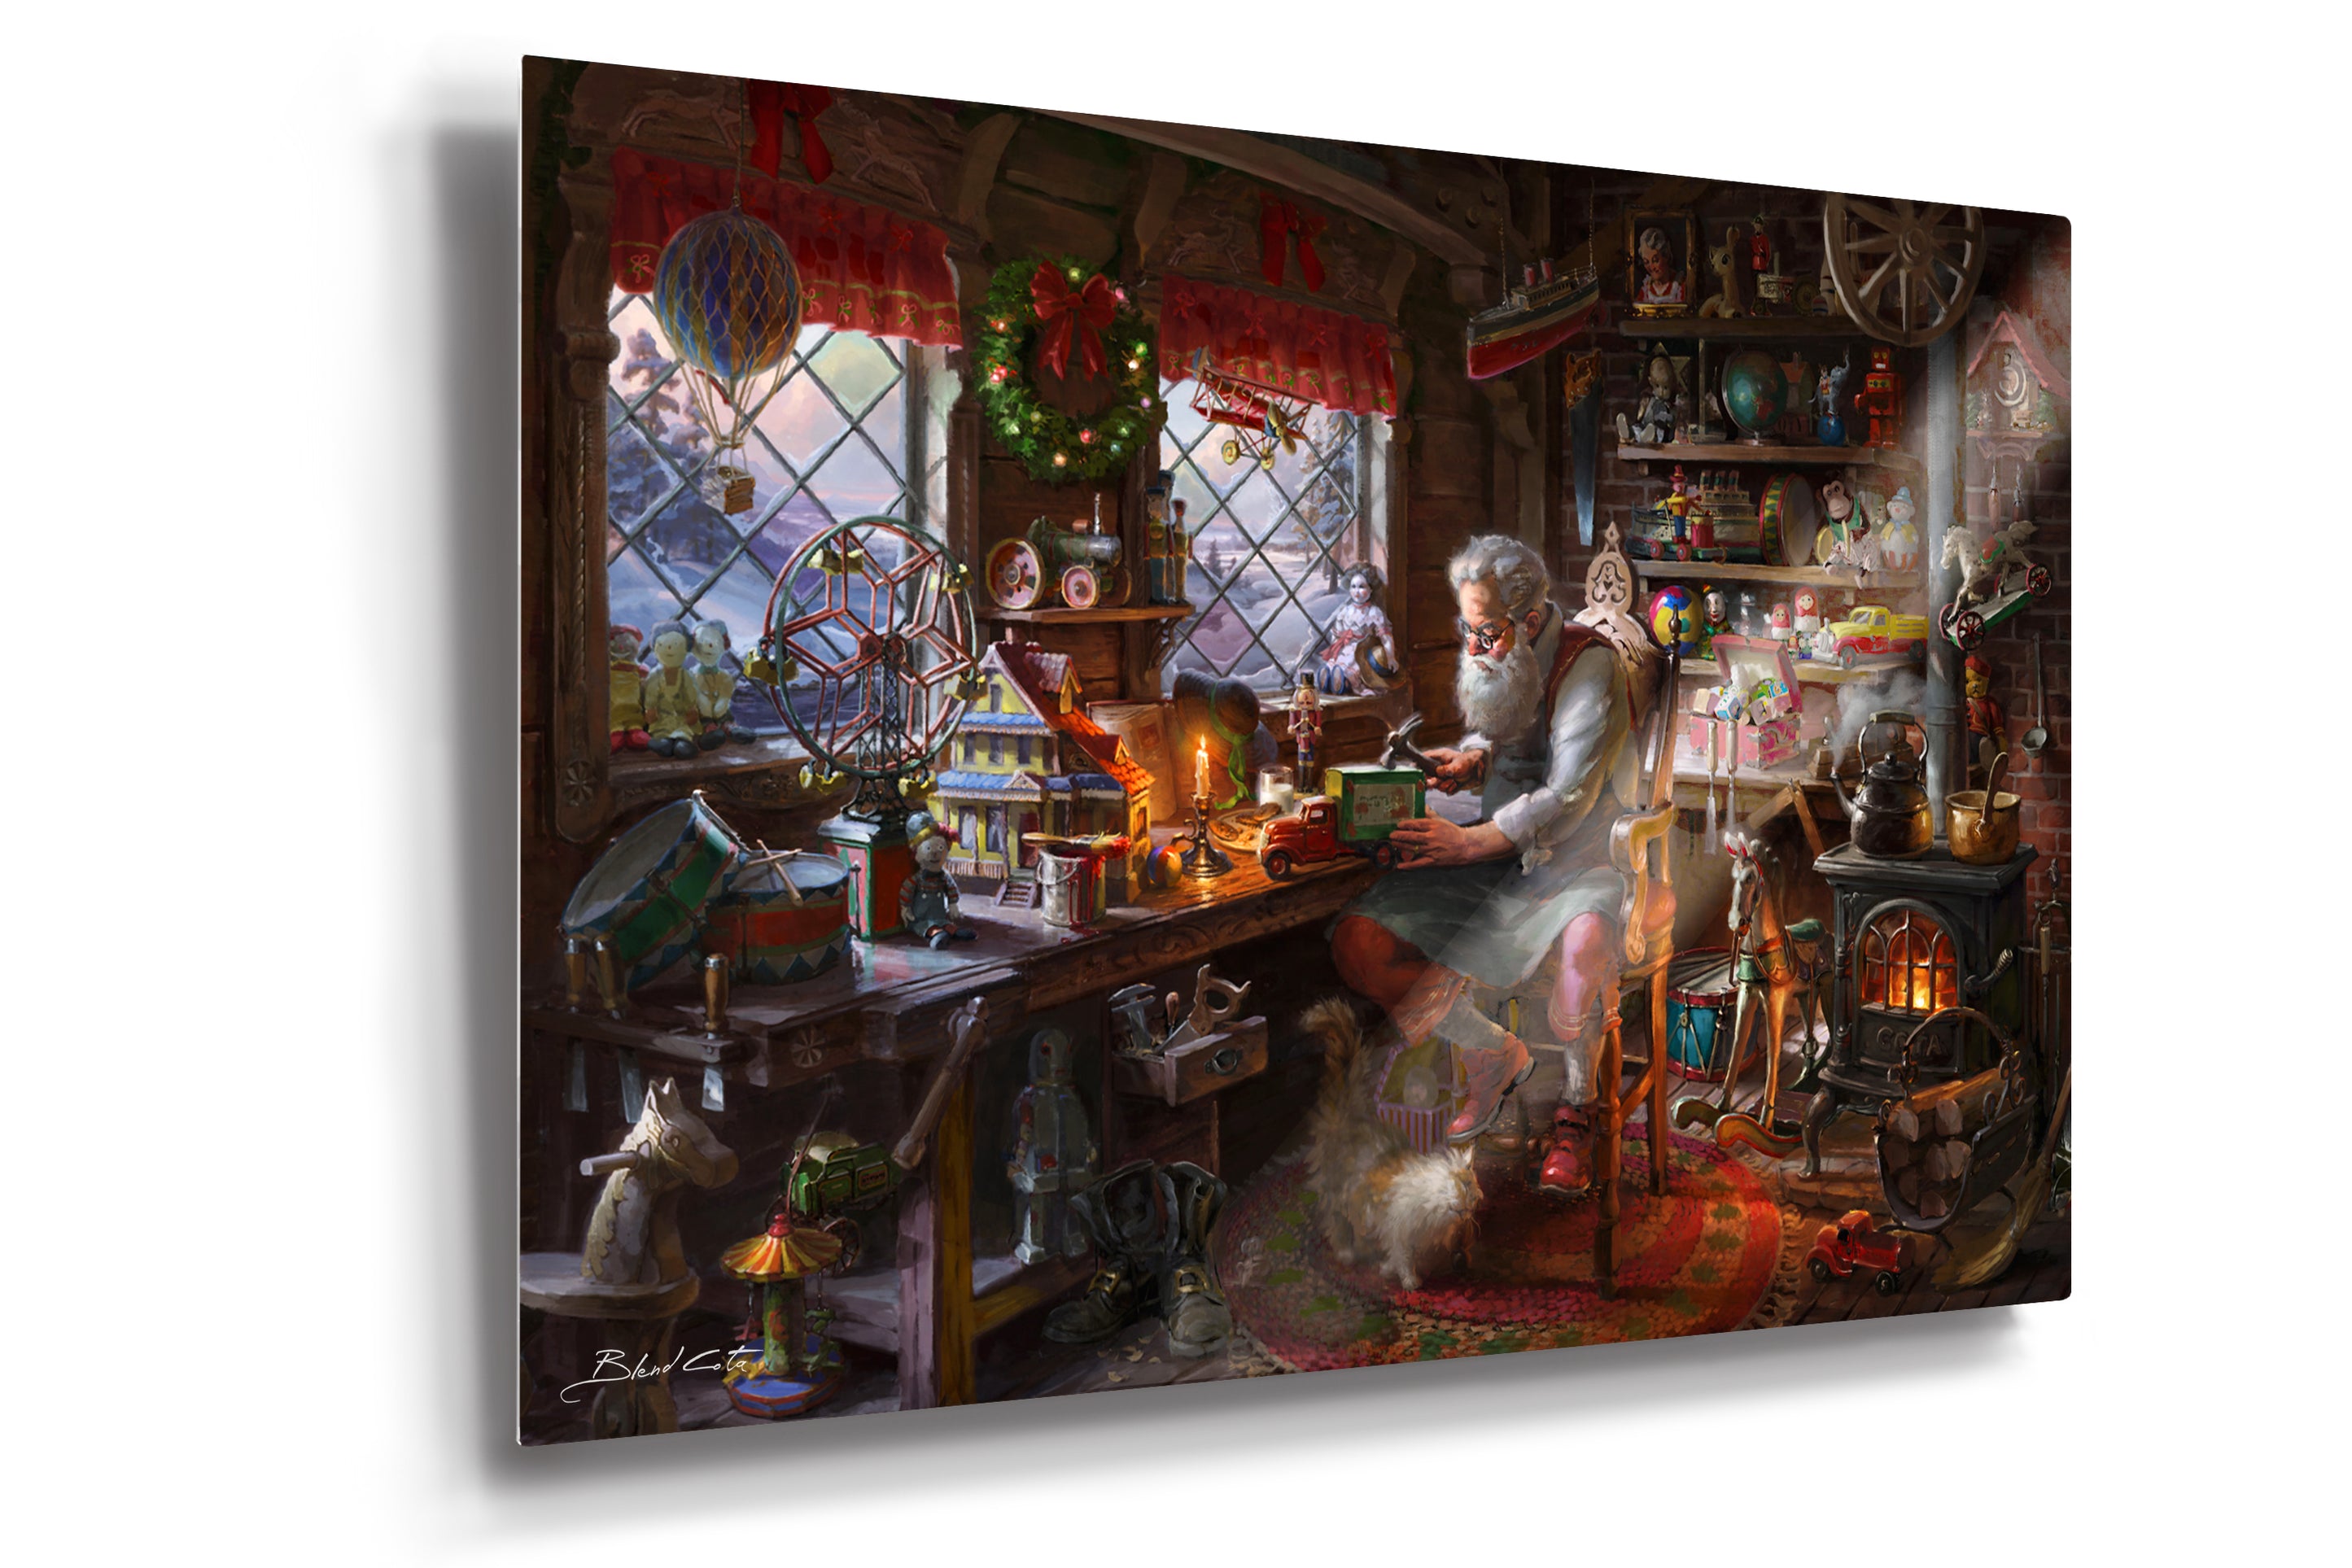 A limited edition metal print of Santa claus making toys in his workshop  during christmas with a cat by his boots and wood burning stove amongst the many children's toys.